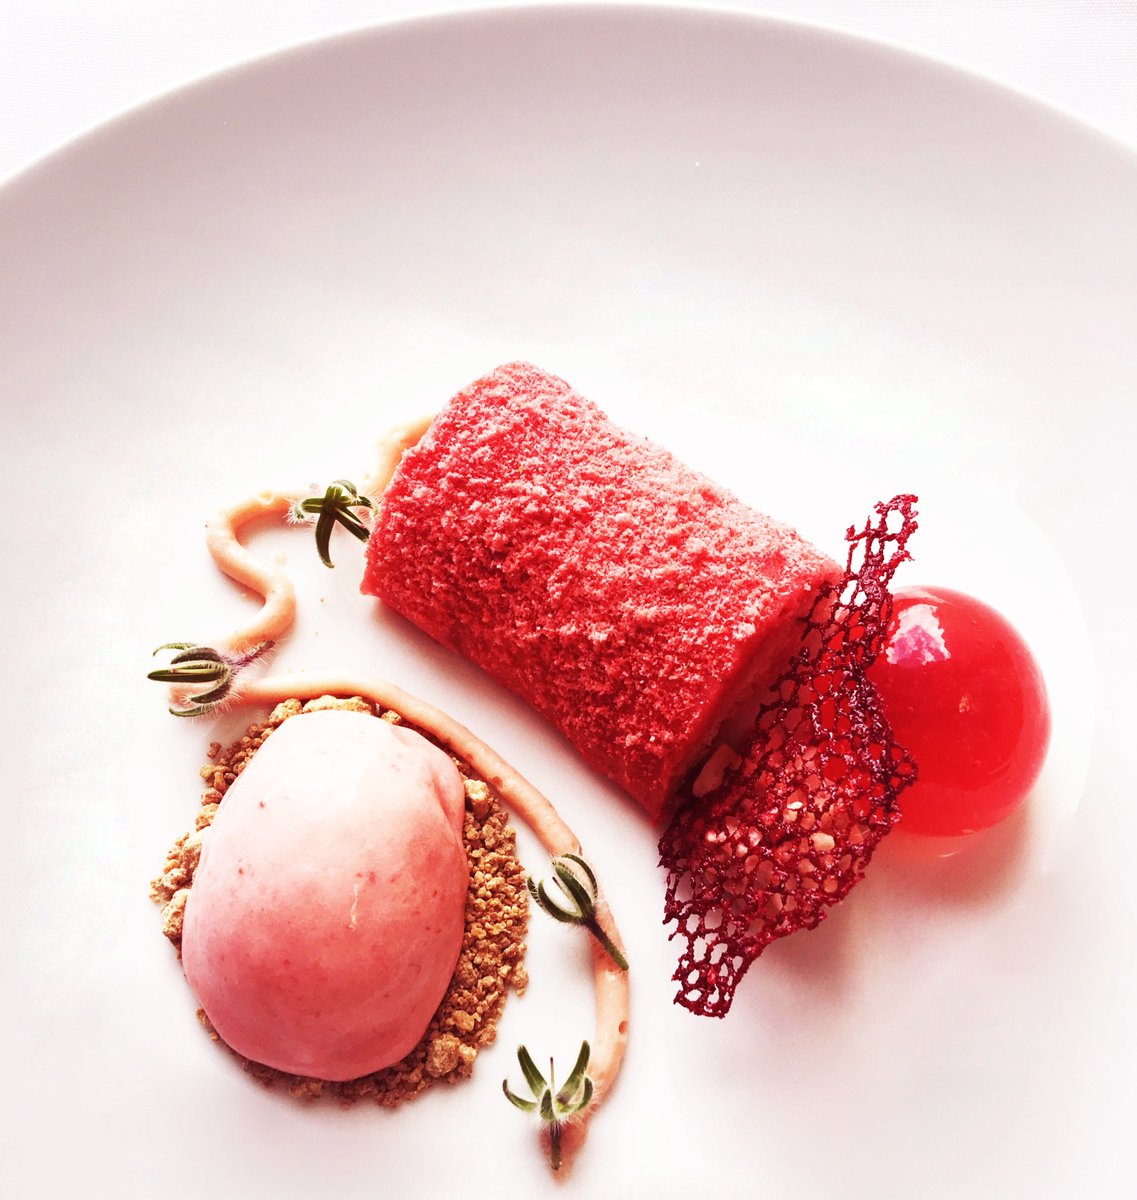 It’s easy to #SmashaStrawb when it’s a Chef Andrew McCrea creation. We’re in awe of his marinated local strawberries, raw strawberry and white chocolate torte, strawberry and almond soil and Caboolture strawberry ice cream #QueenslandParliament #StrawberryGrowers #QldStrawberries